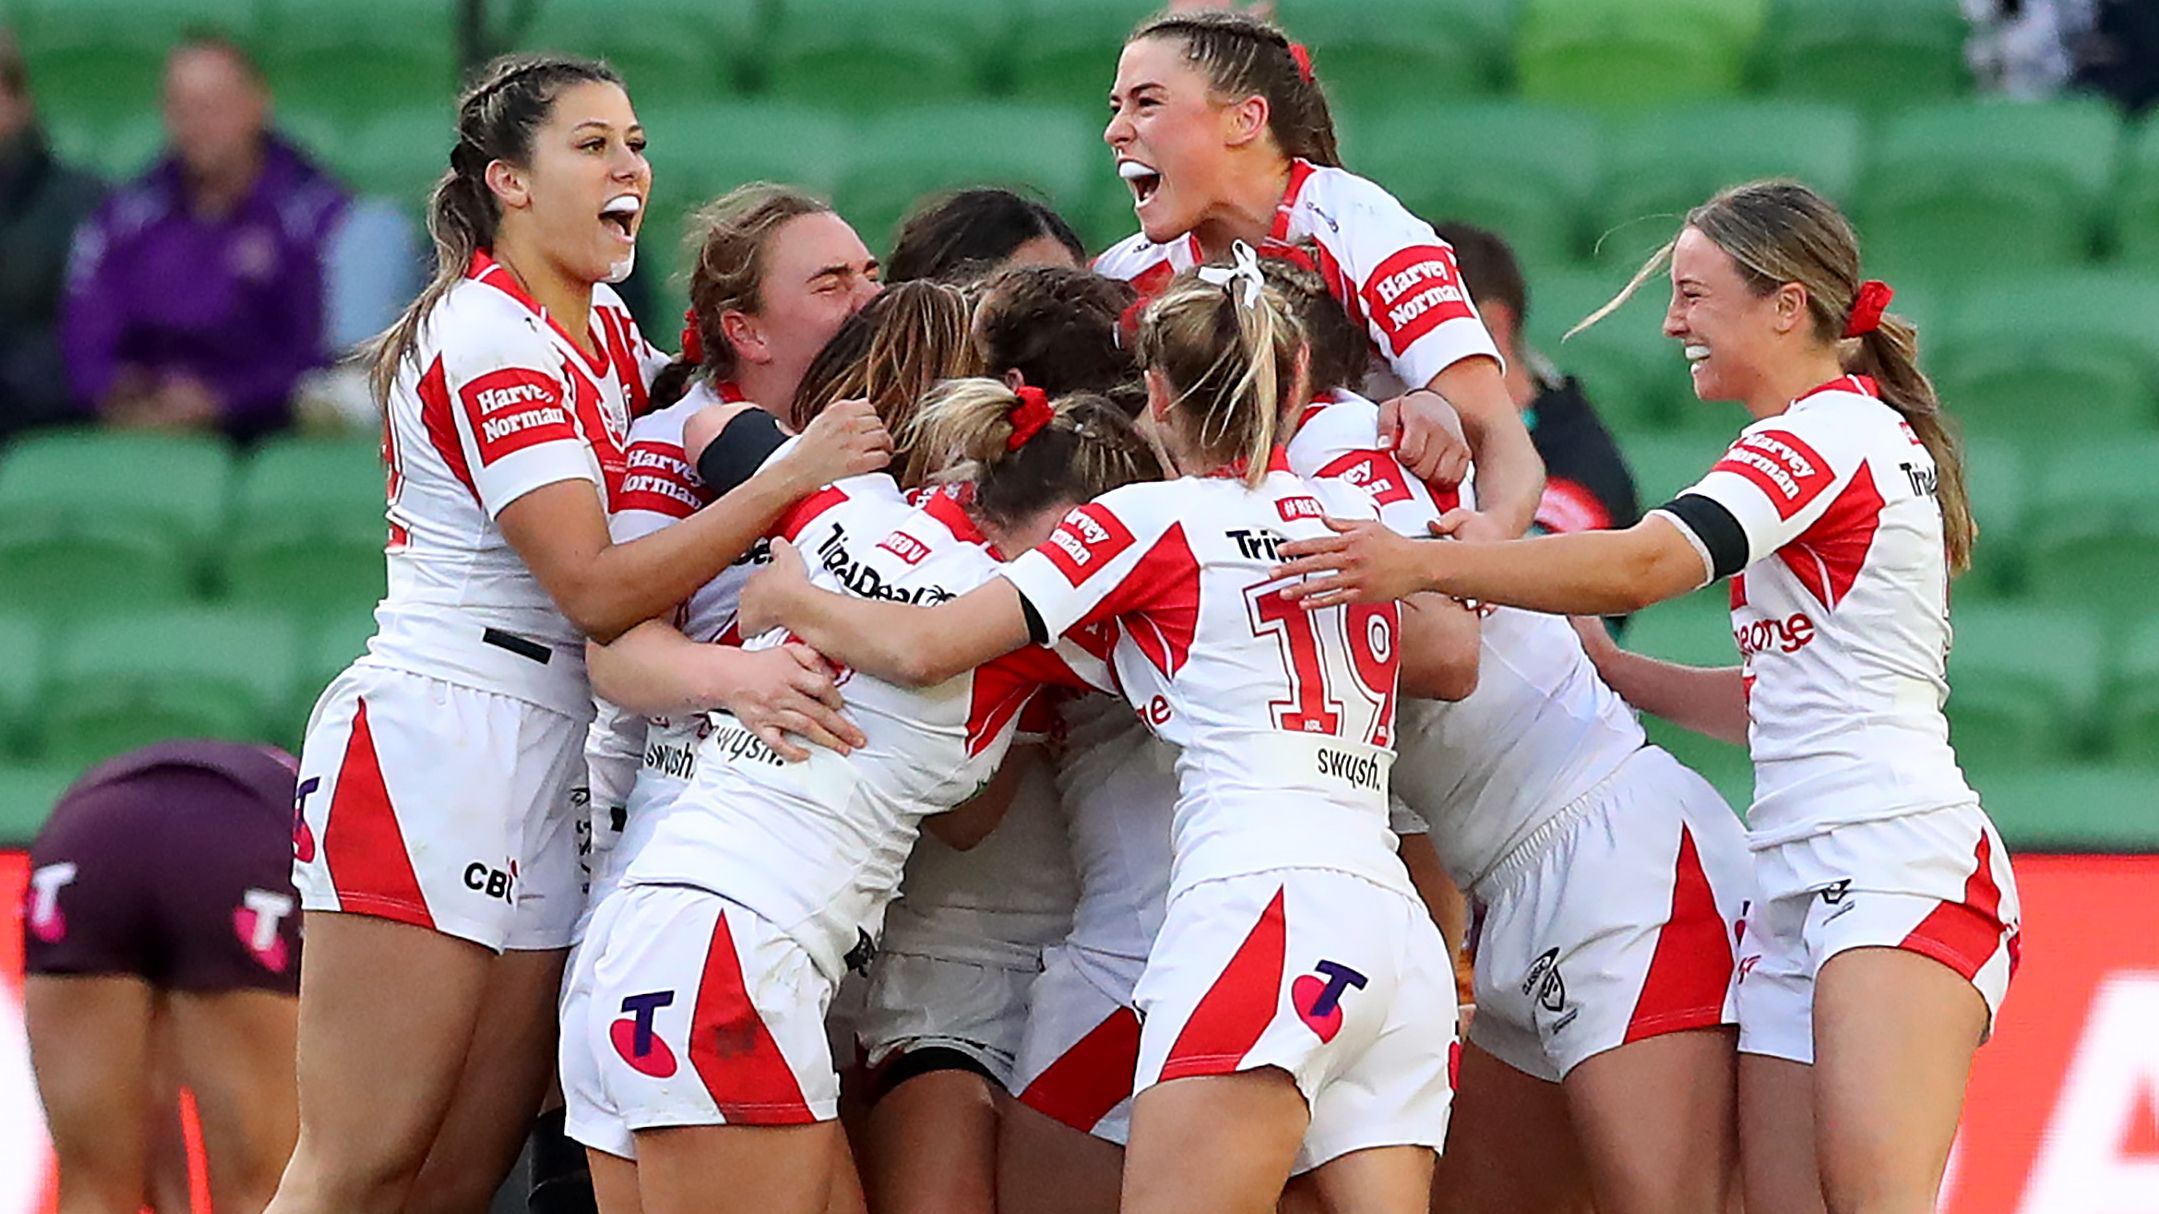 Dragons players celebrate victory during the round four NRLW match between Brisbane Broncos and St George Illawarra Dragons at AAMI Park.